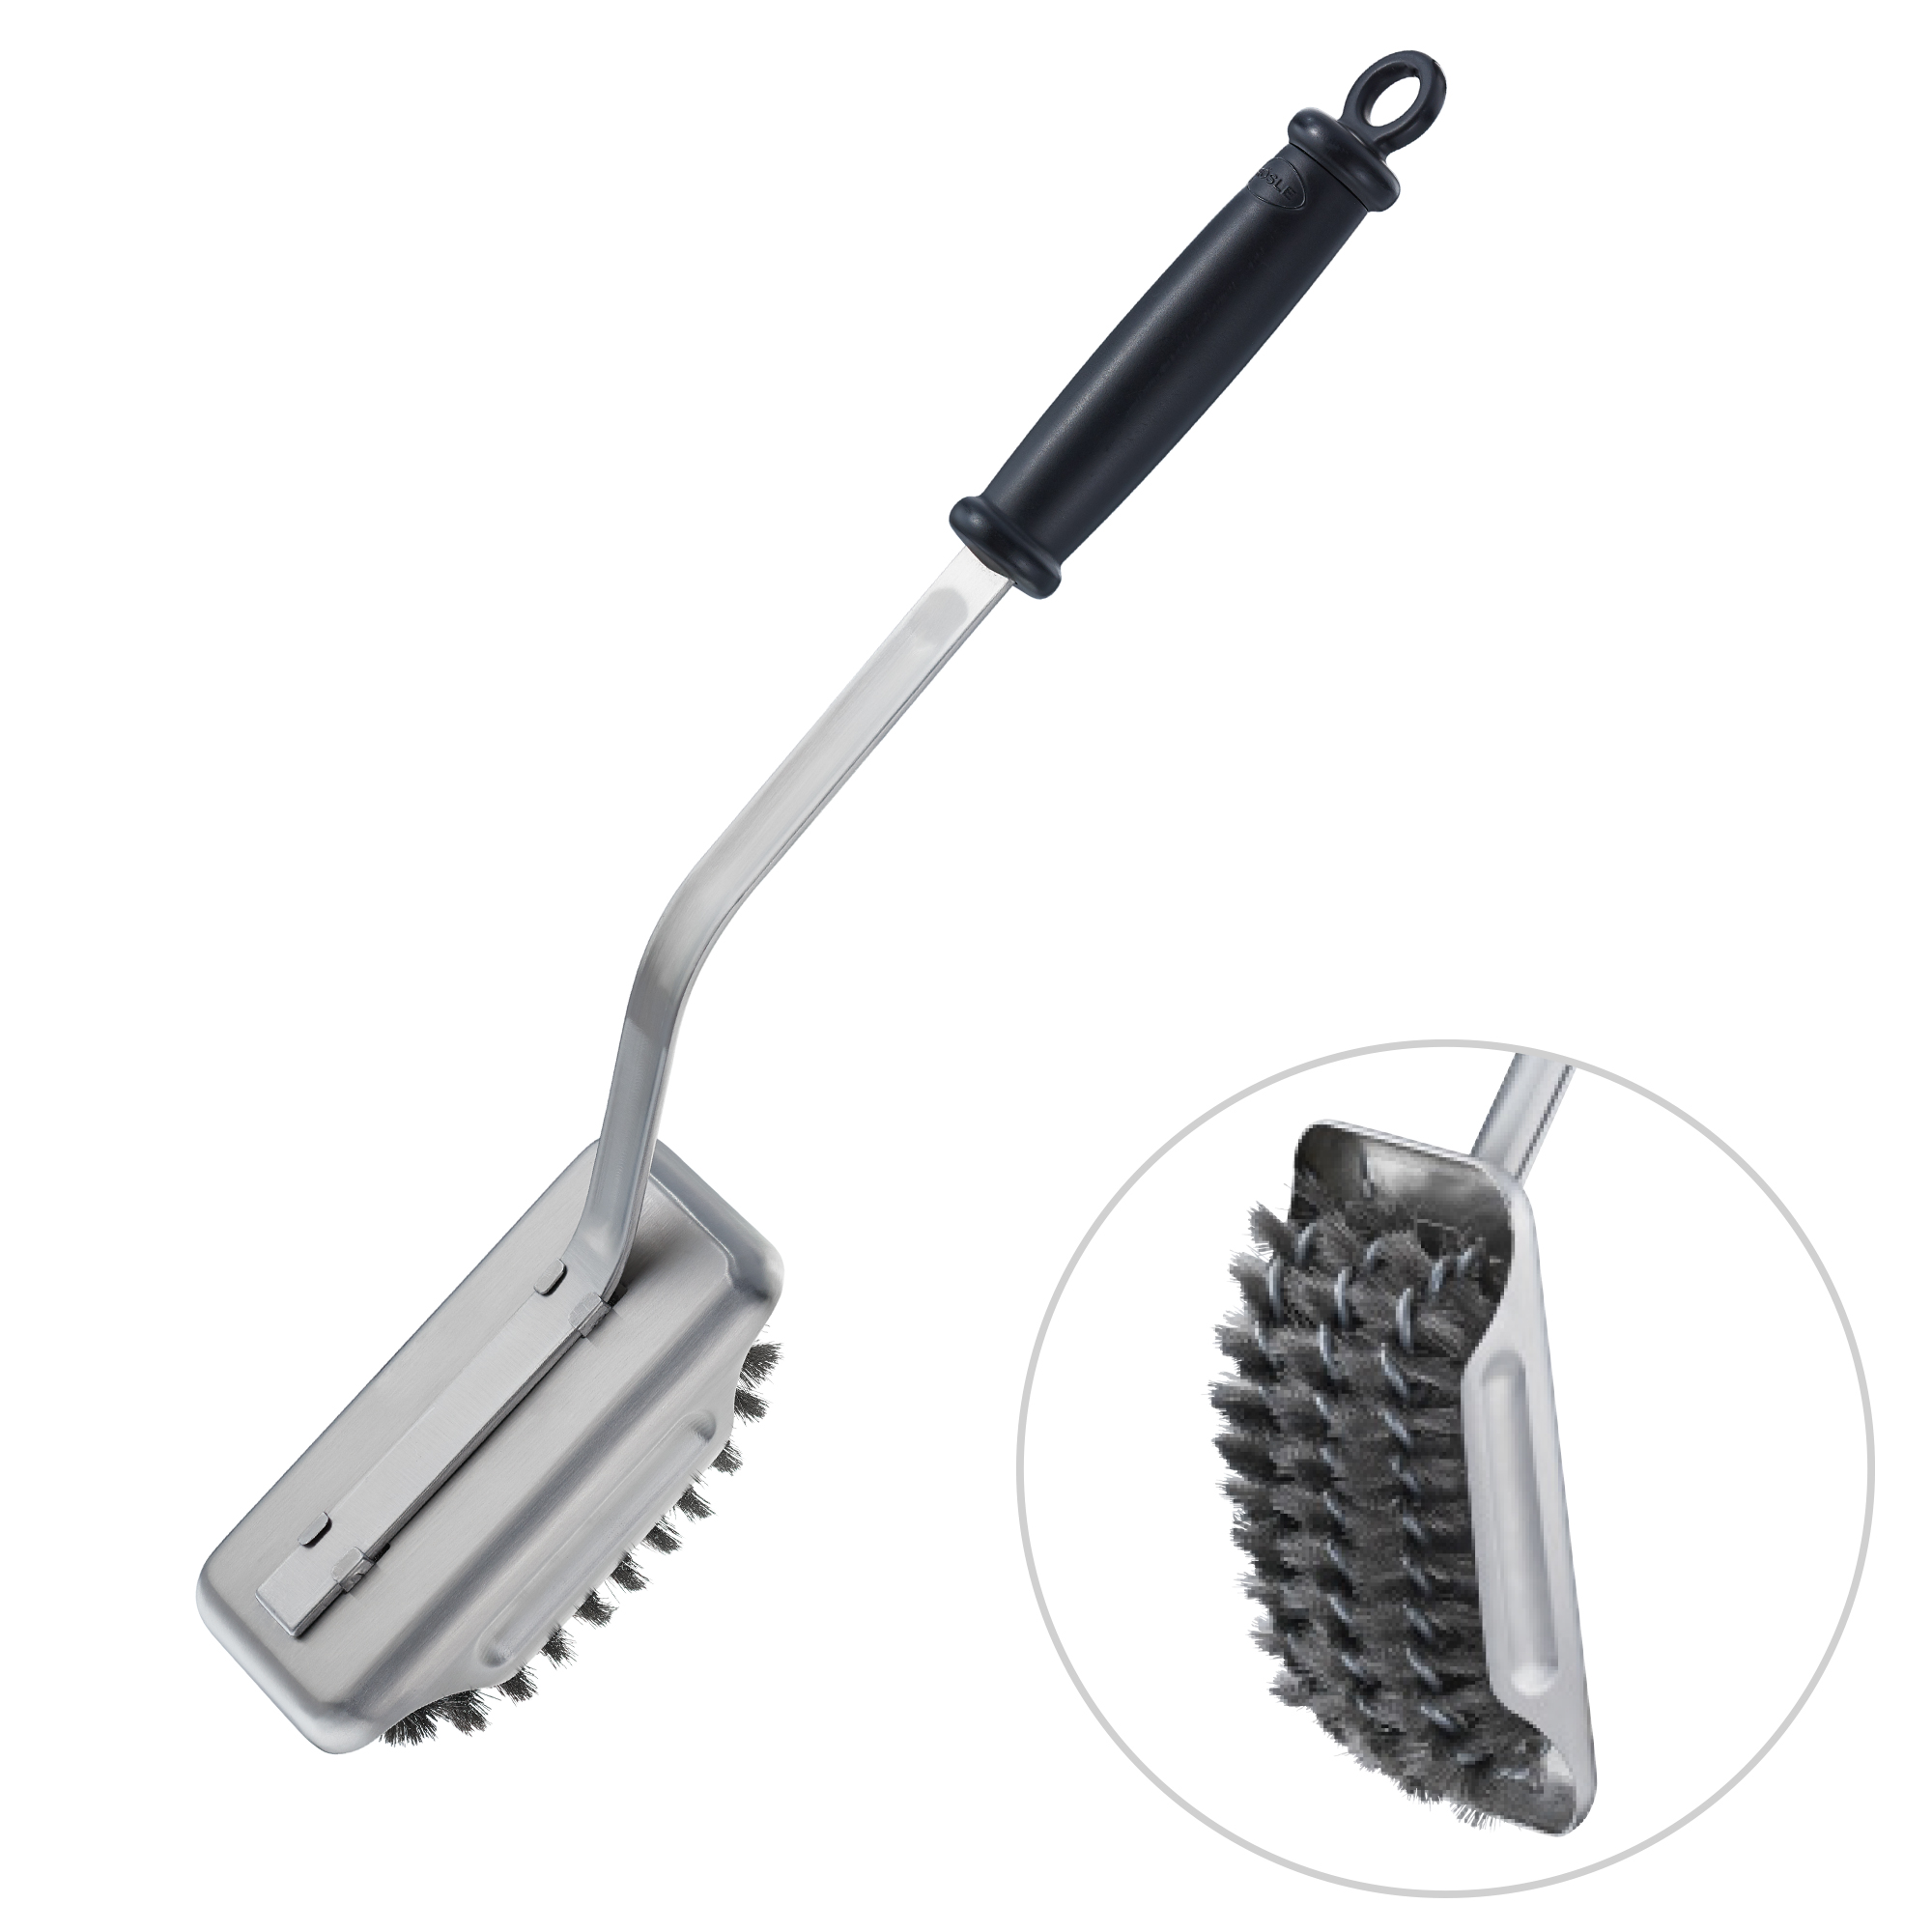 Barbecue Cleaning Brush SlideX